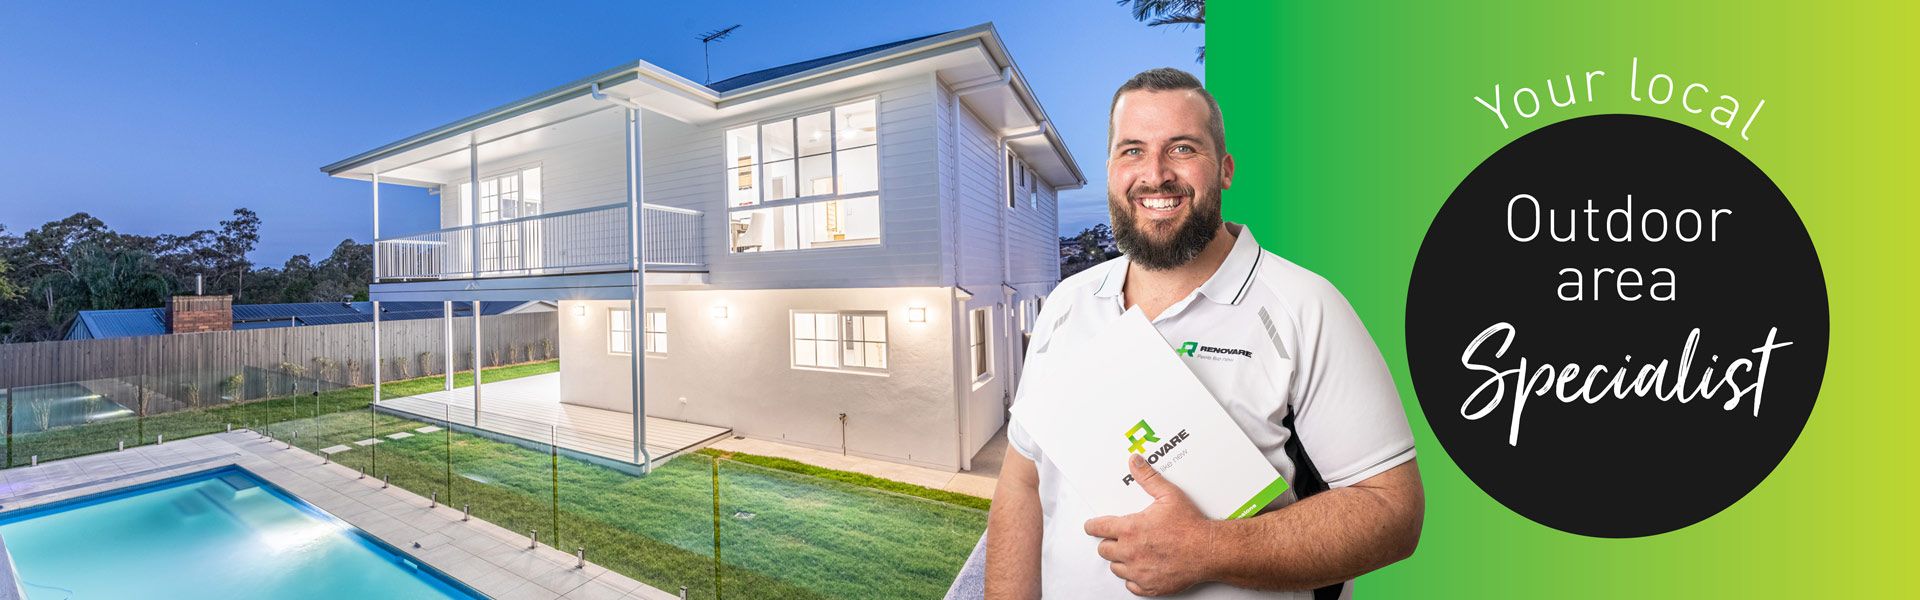 Joe smiling with a house renovation in the background | Renovare